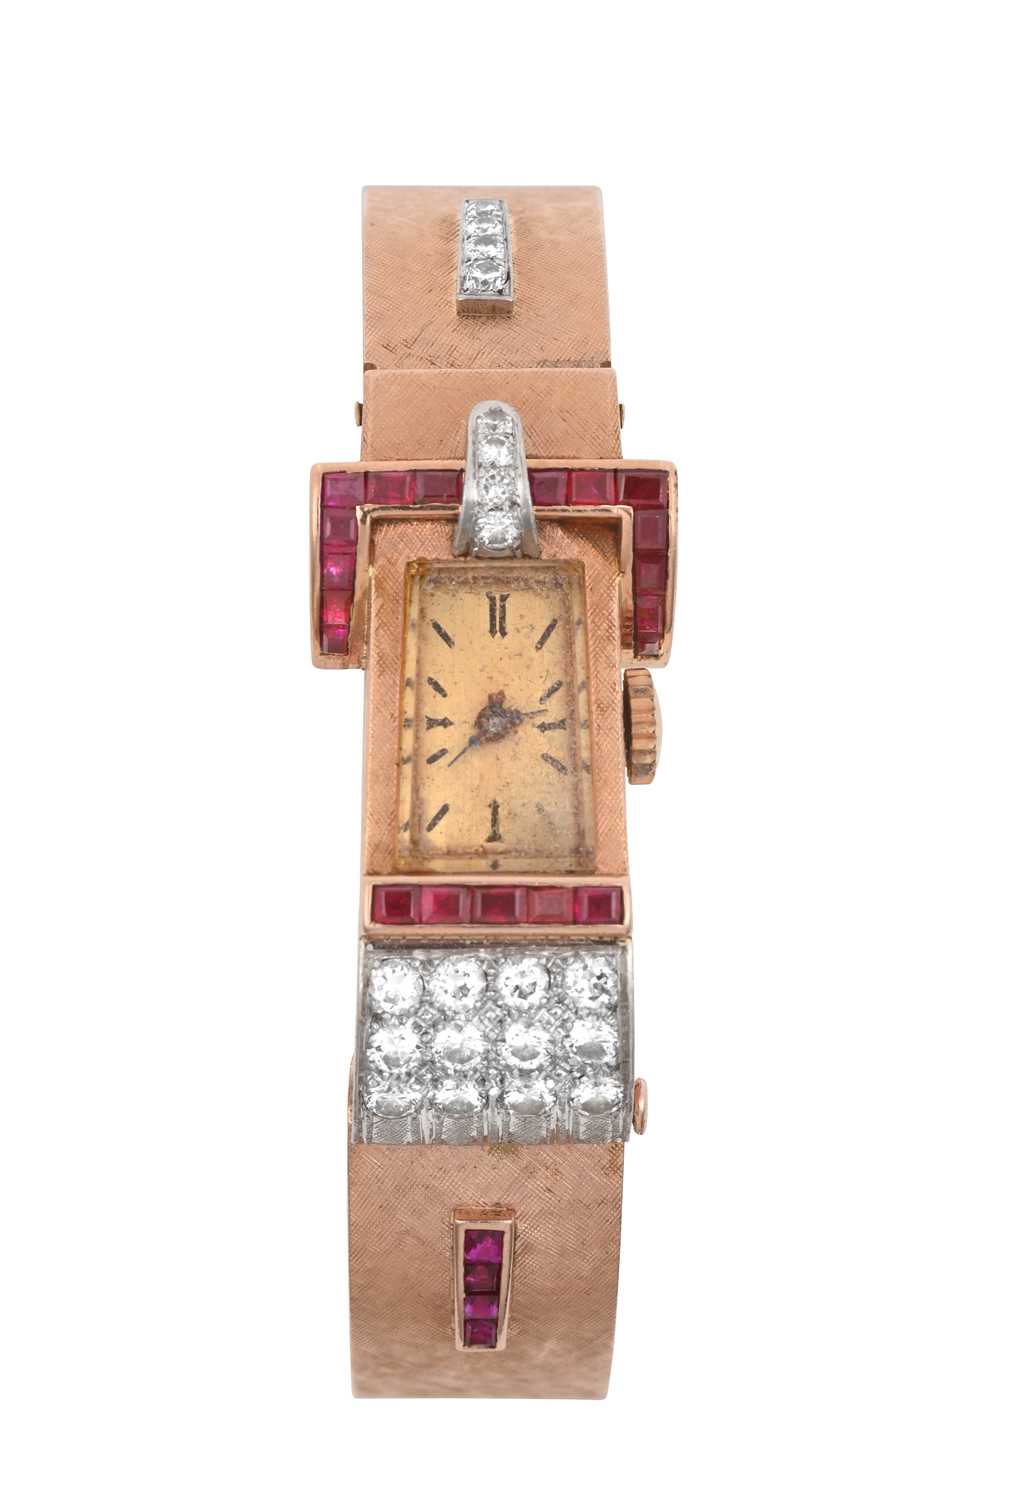 A Lady's Diamond and Ruby Set Wristwatch, signed Lackritz, circa 1960, manual wound lever movement